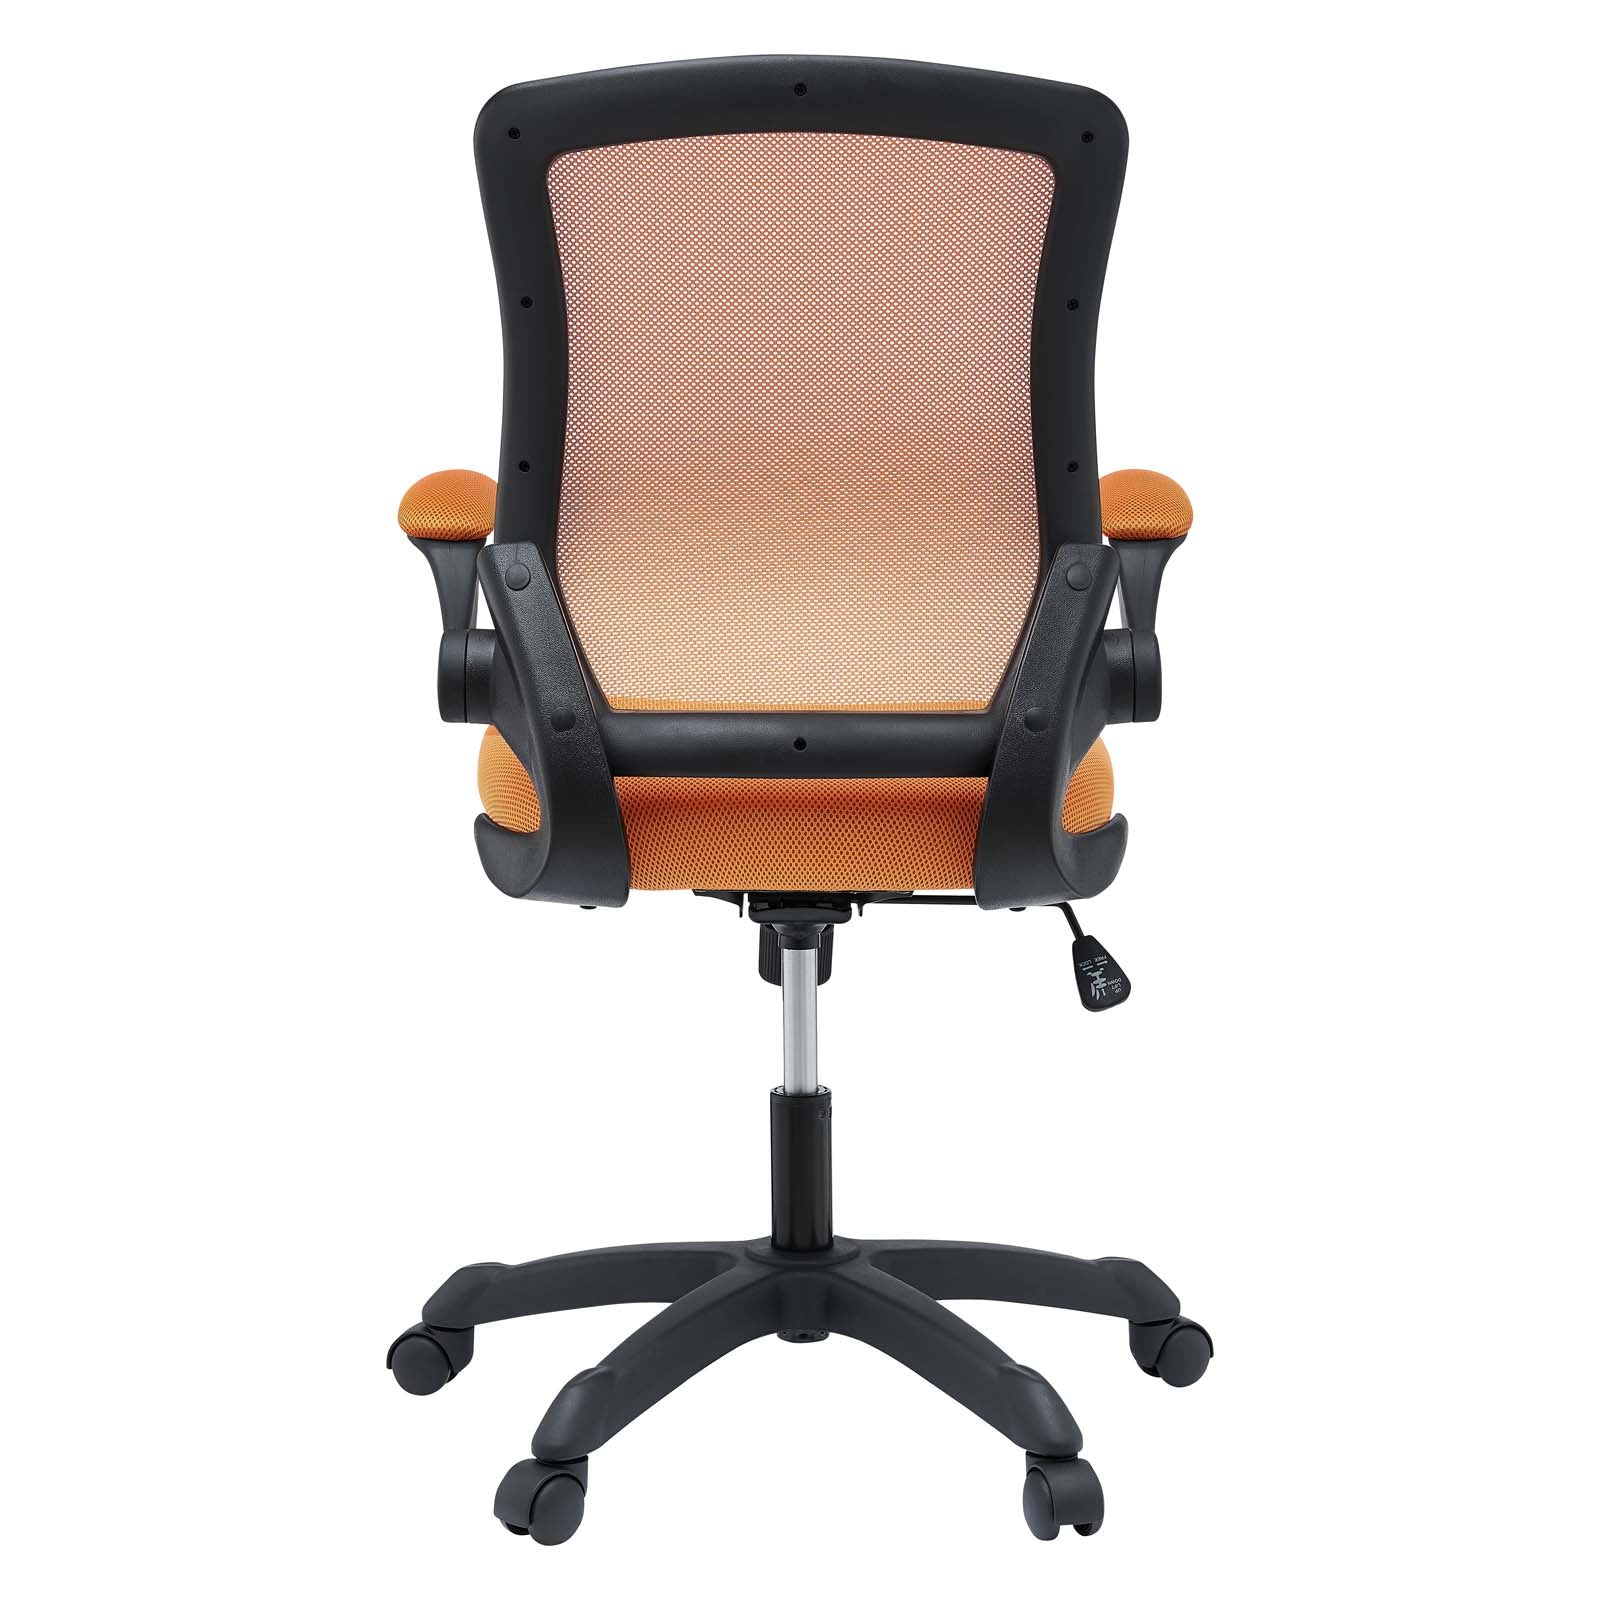 Modway Task Chairs - Veer Mesh Office Chair Orange